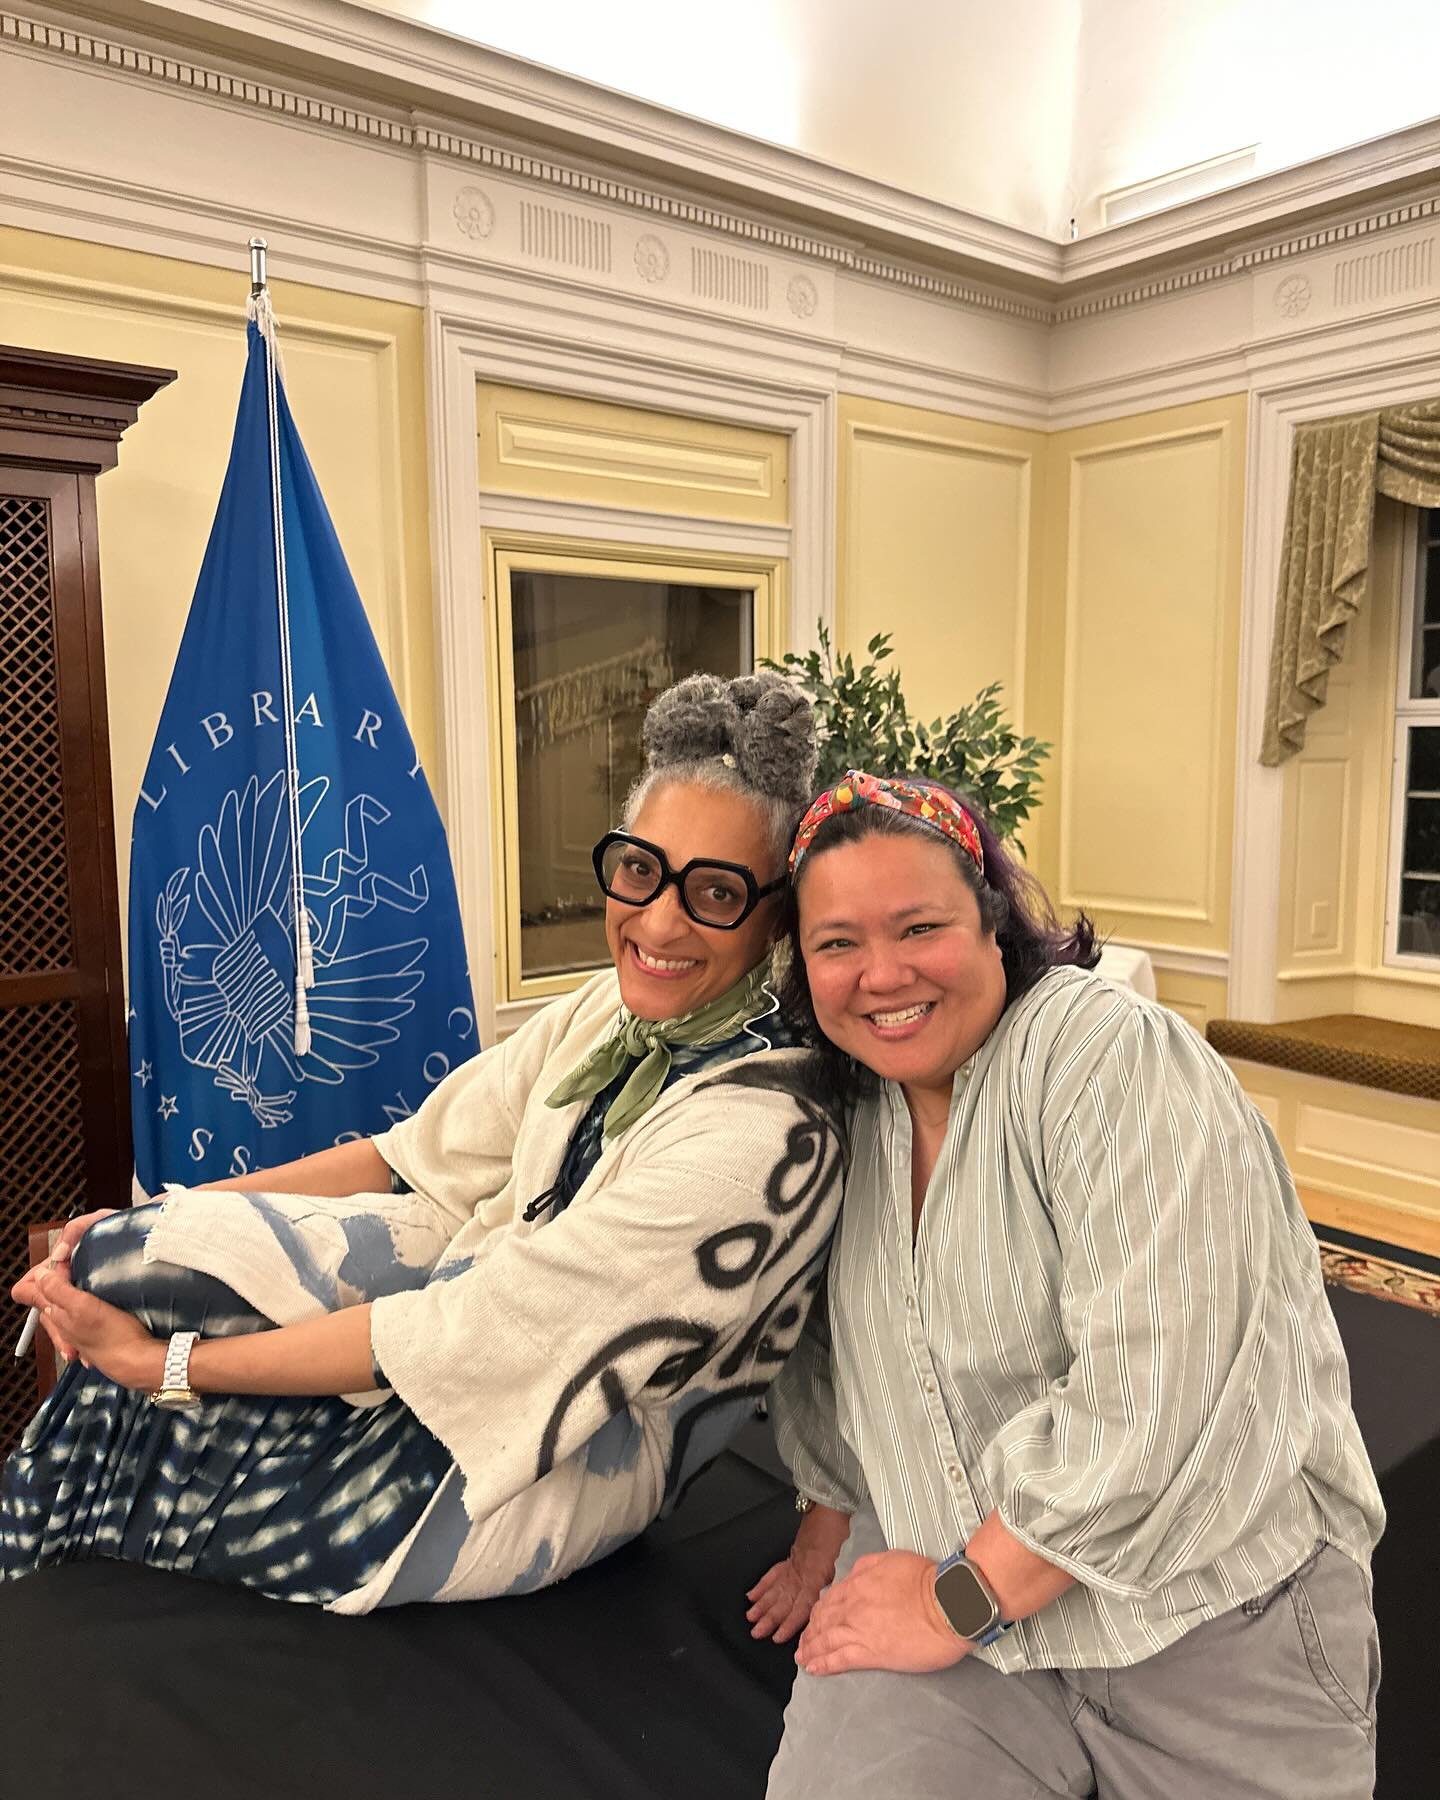 I met the incomparable @carlaphall. She is such a warm and funny person. She is the same entertaining person as on tv. I mean, we literally hopped up on the signing table for our photo. 
 
Many thanks to Carla and the @librarycongress for having us. 